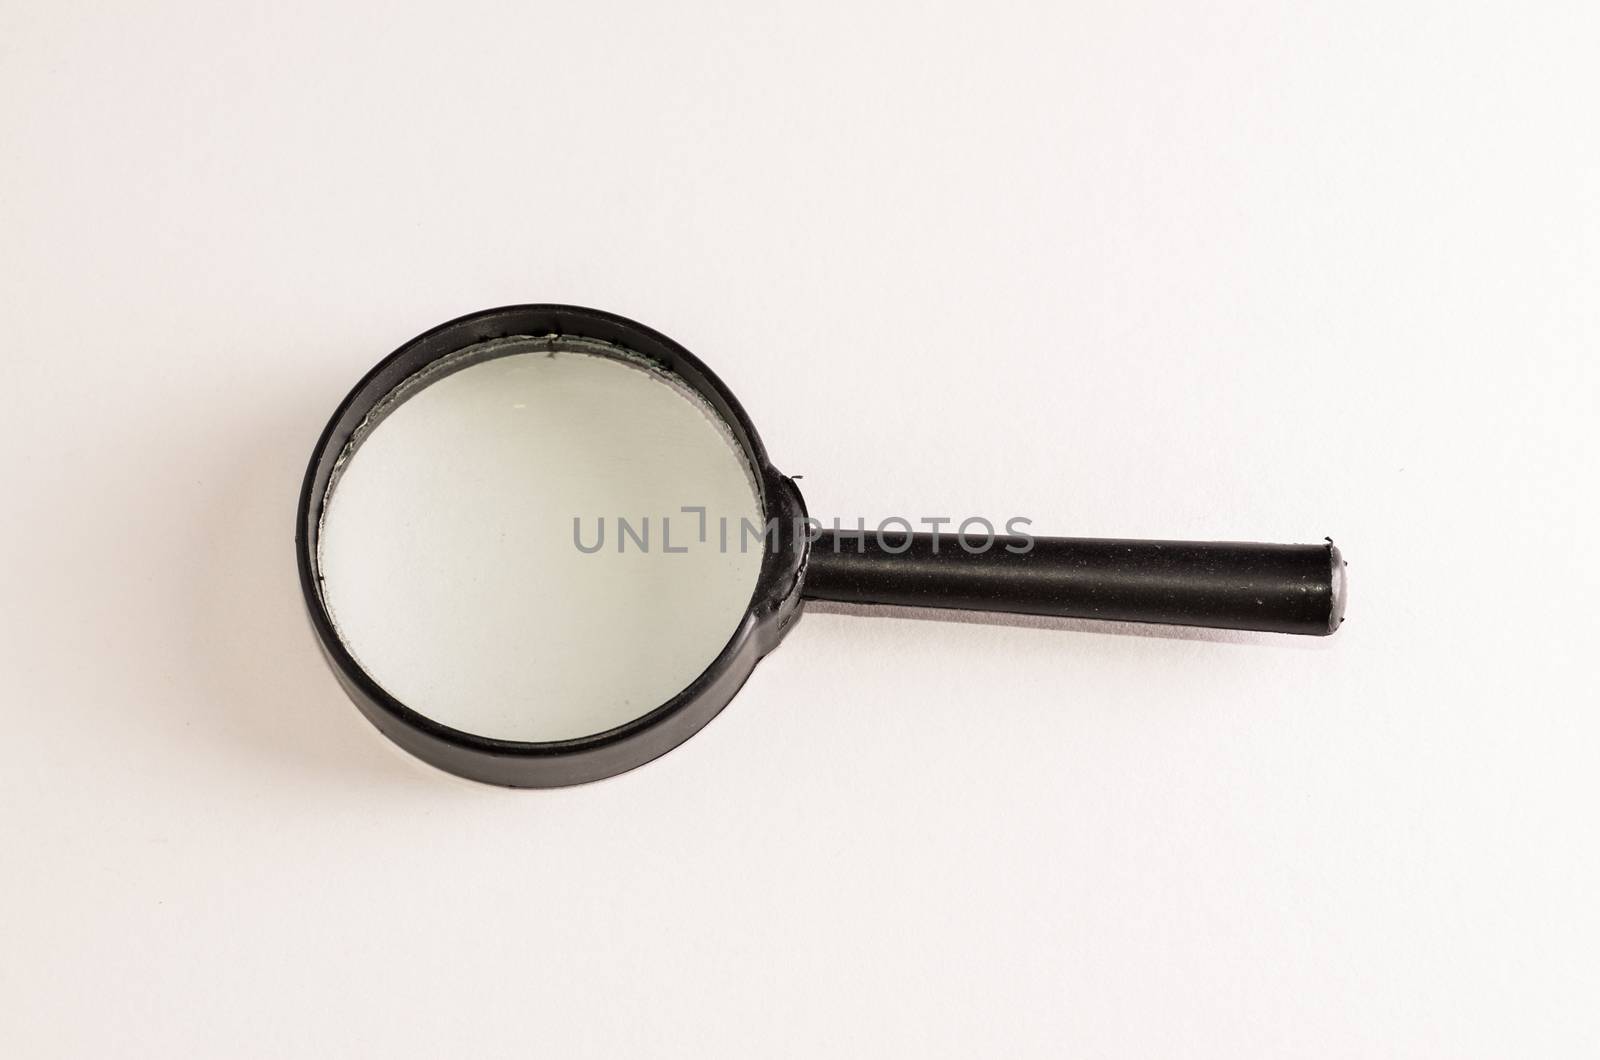 Vintage Magnify Glass Loupe on a White Background